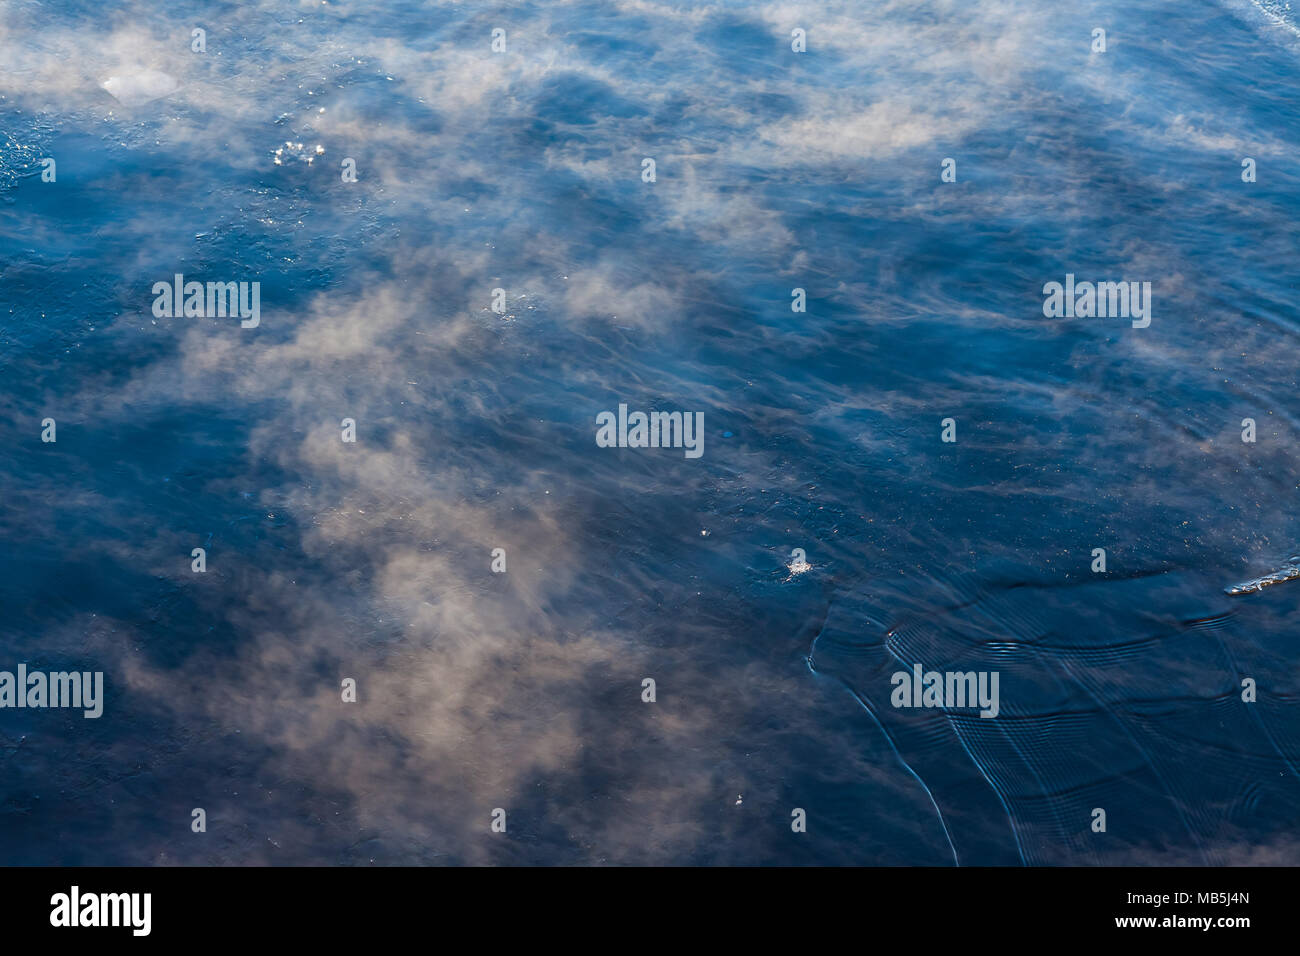 Water vapor on surface of cold water Stock Photo